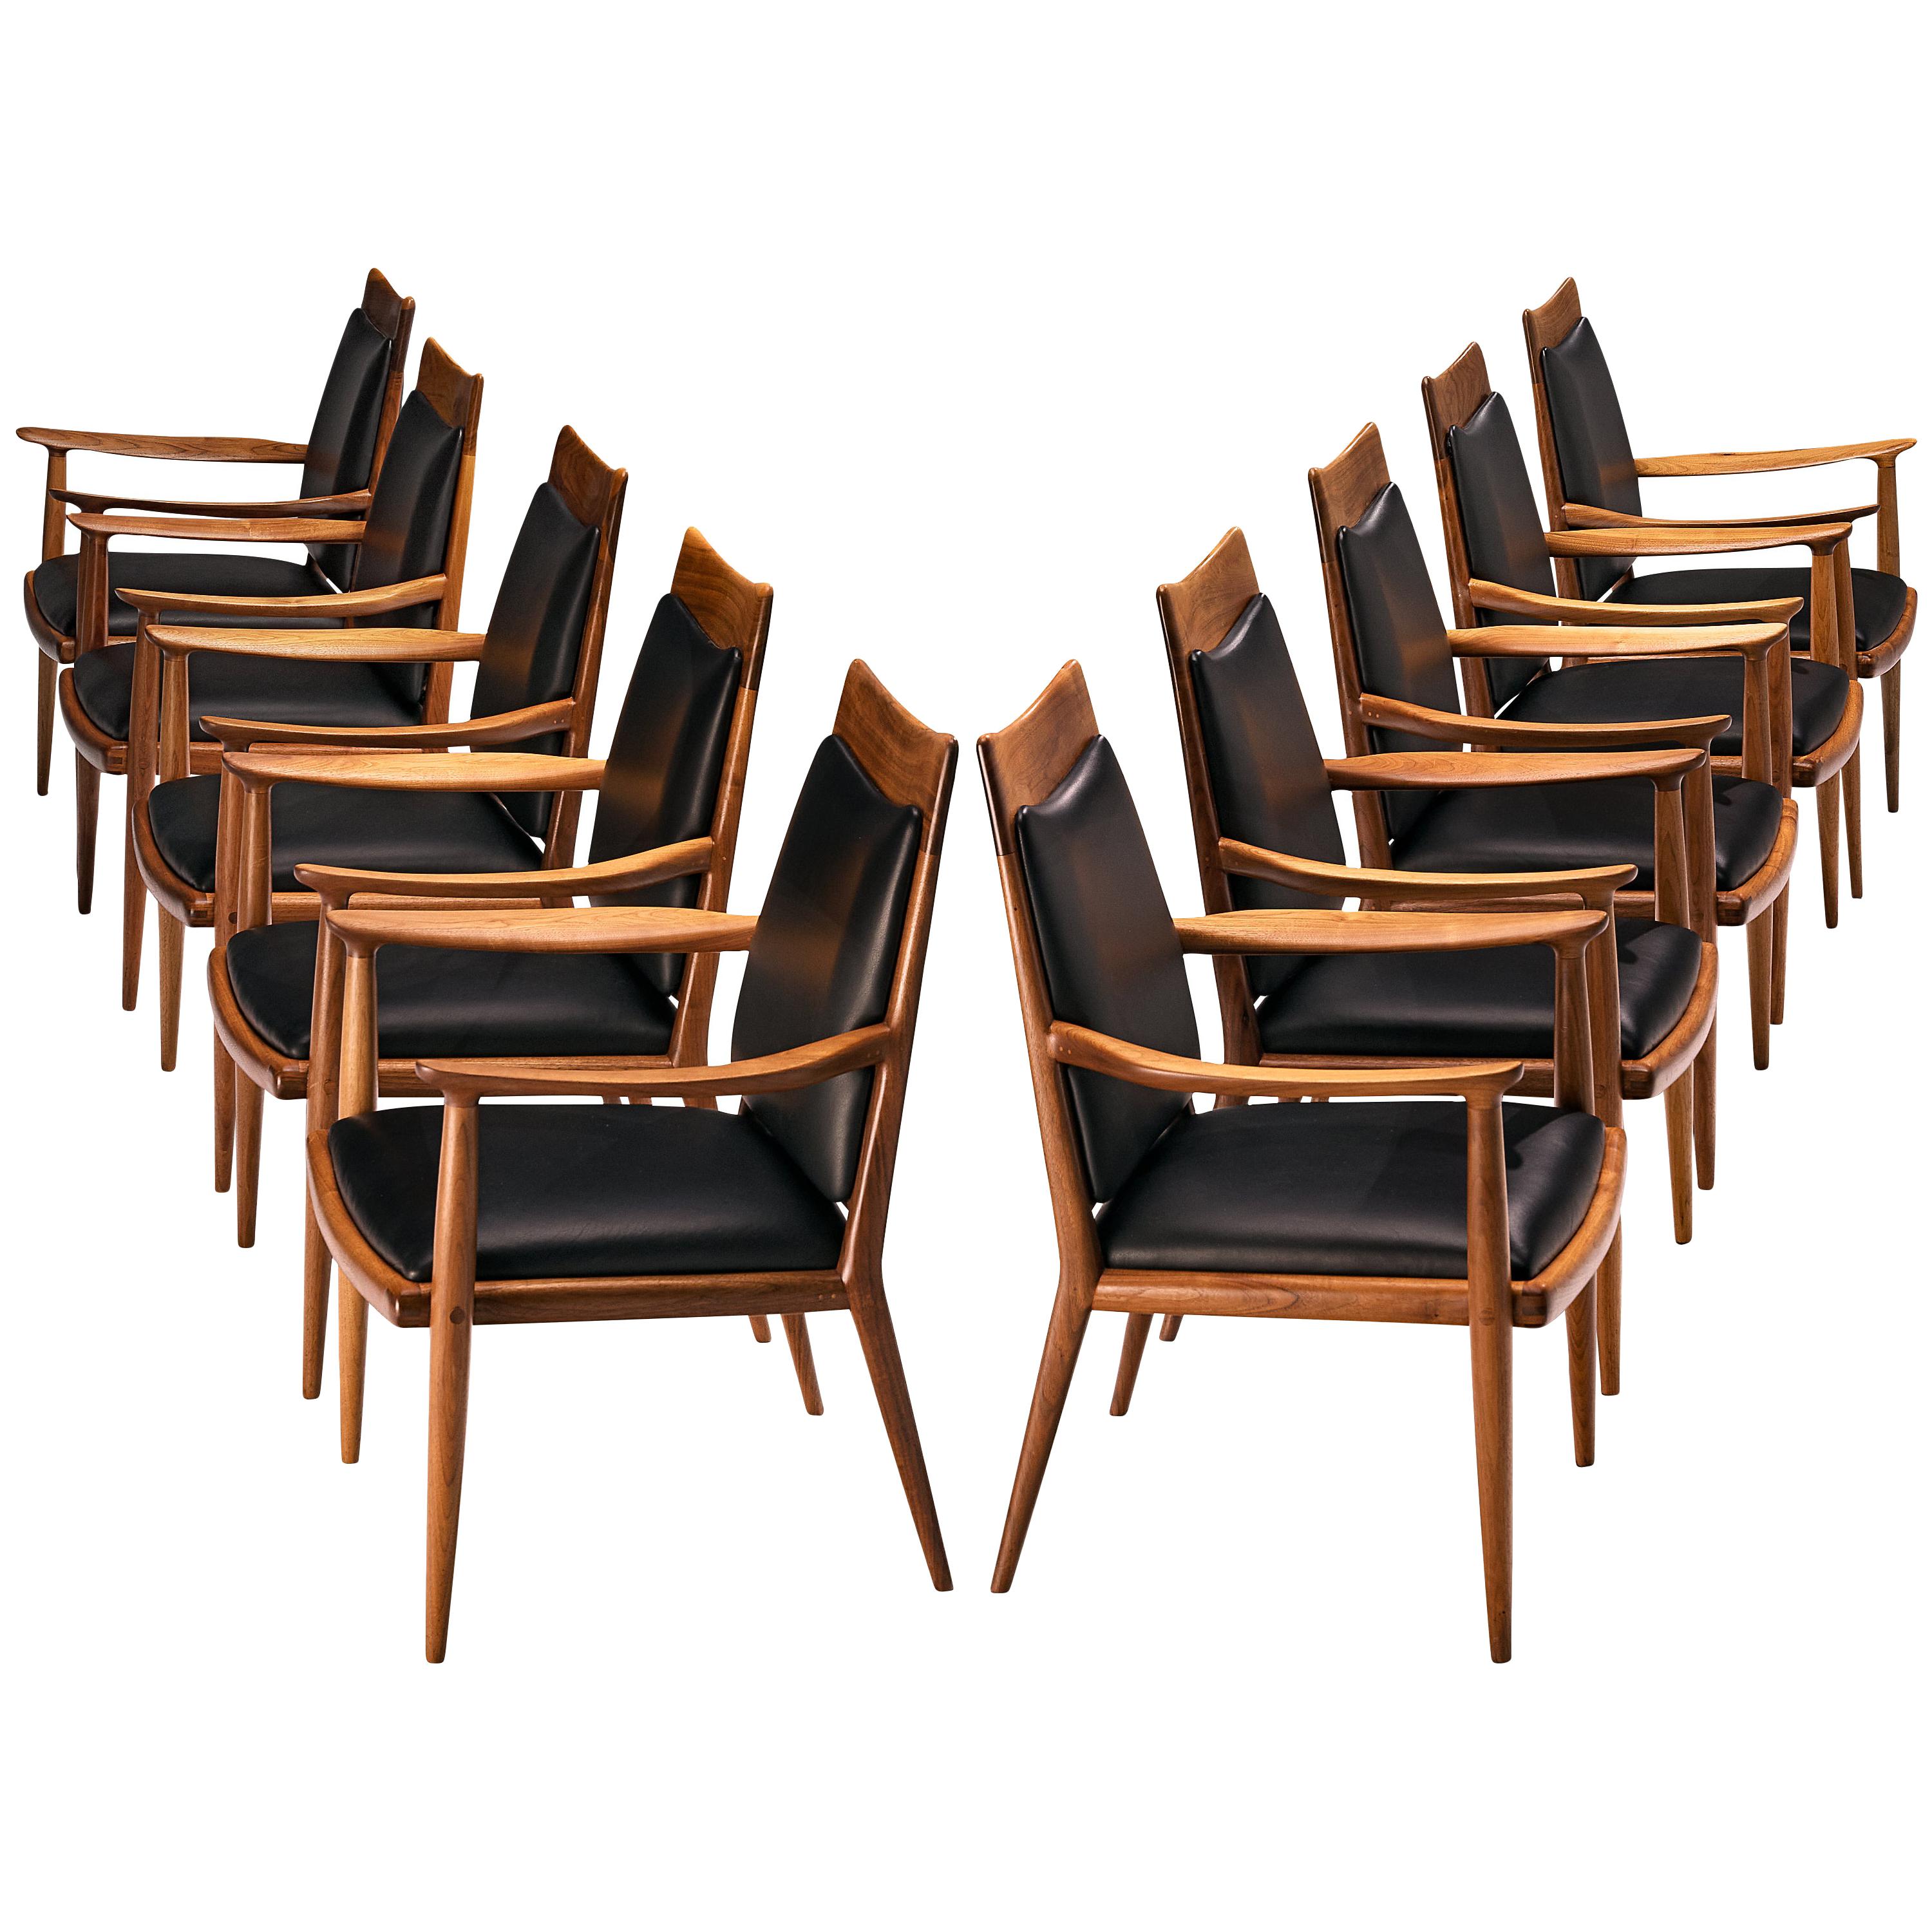 Sam Maloof Handcrafted Set of 10 Armchairs in Walnut and Black Leather